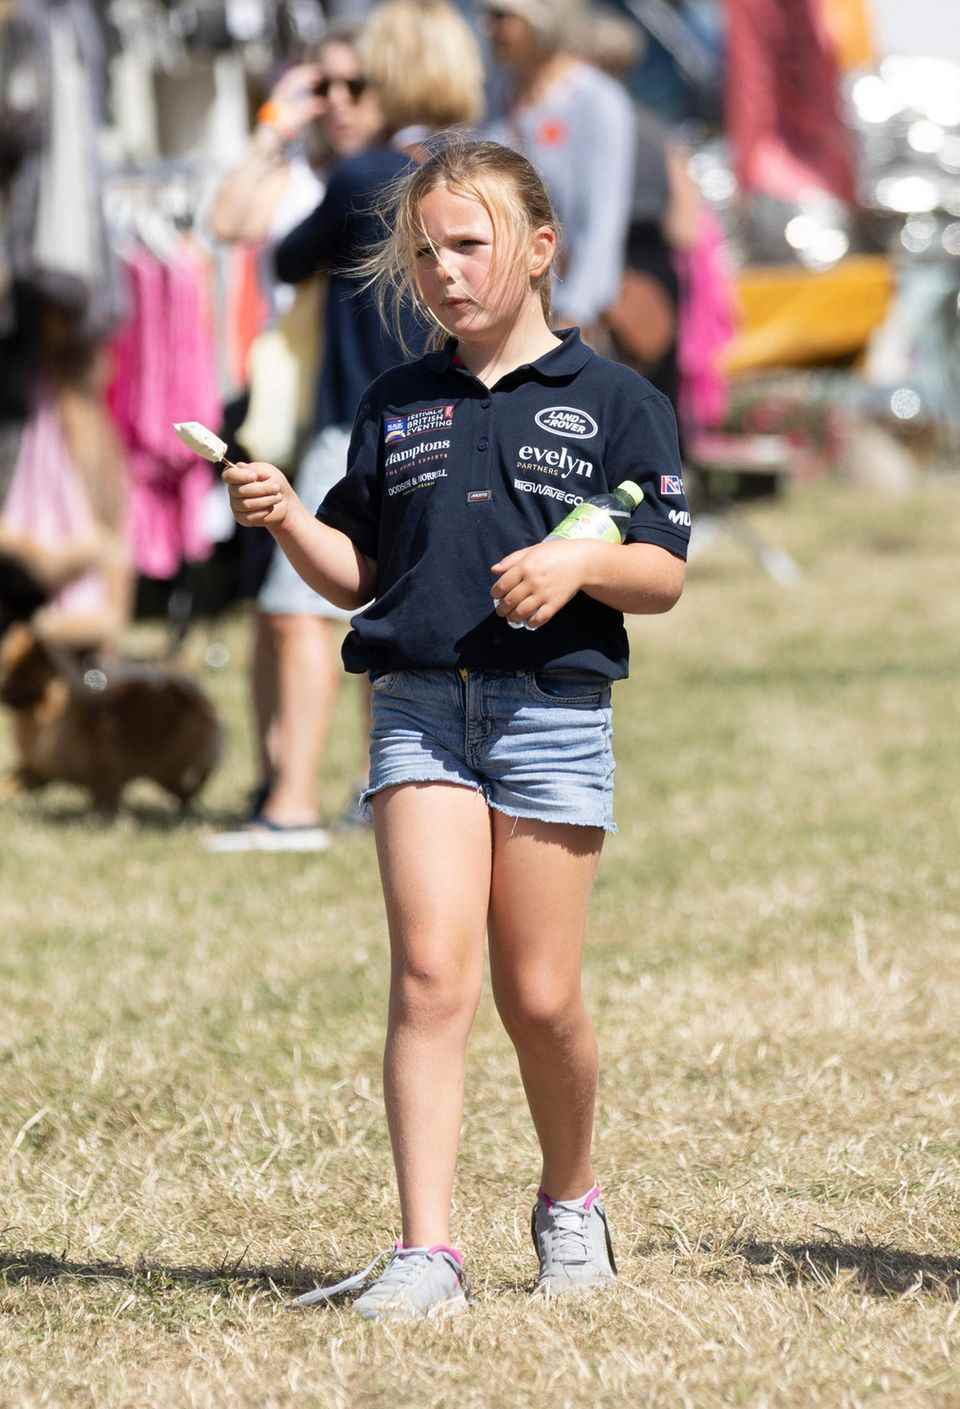 Mia also goes to the horse festival in a shirt and denim shorts